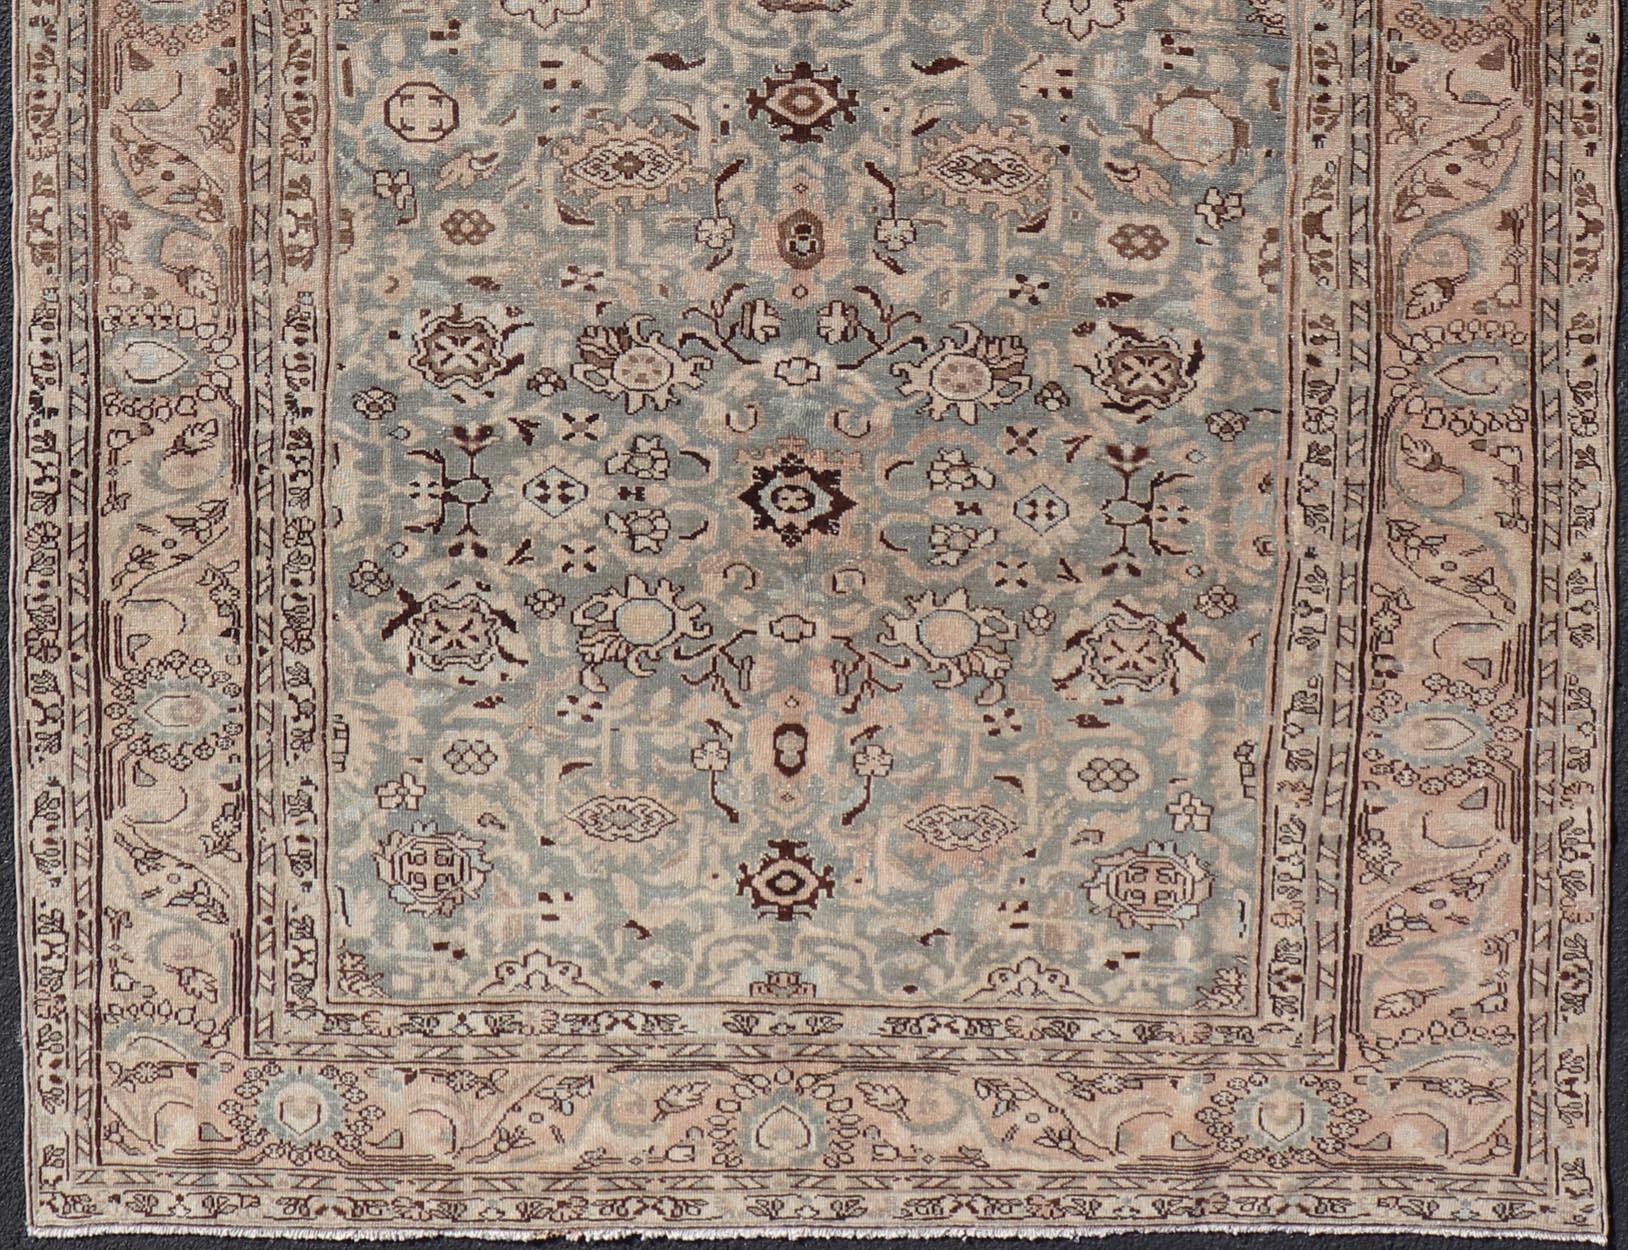 Wool All-Over Floral Antique Persian Hamadan Rug in Gray Green, Peach & Earth Tones For Sale